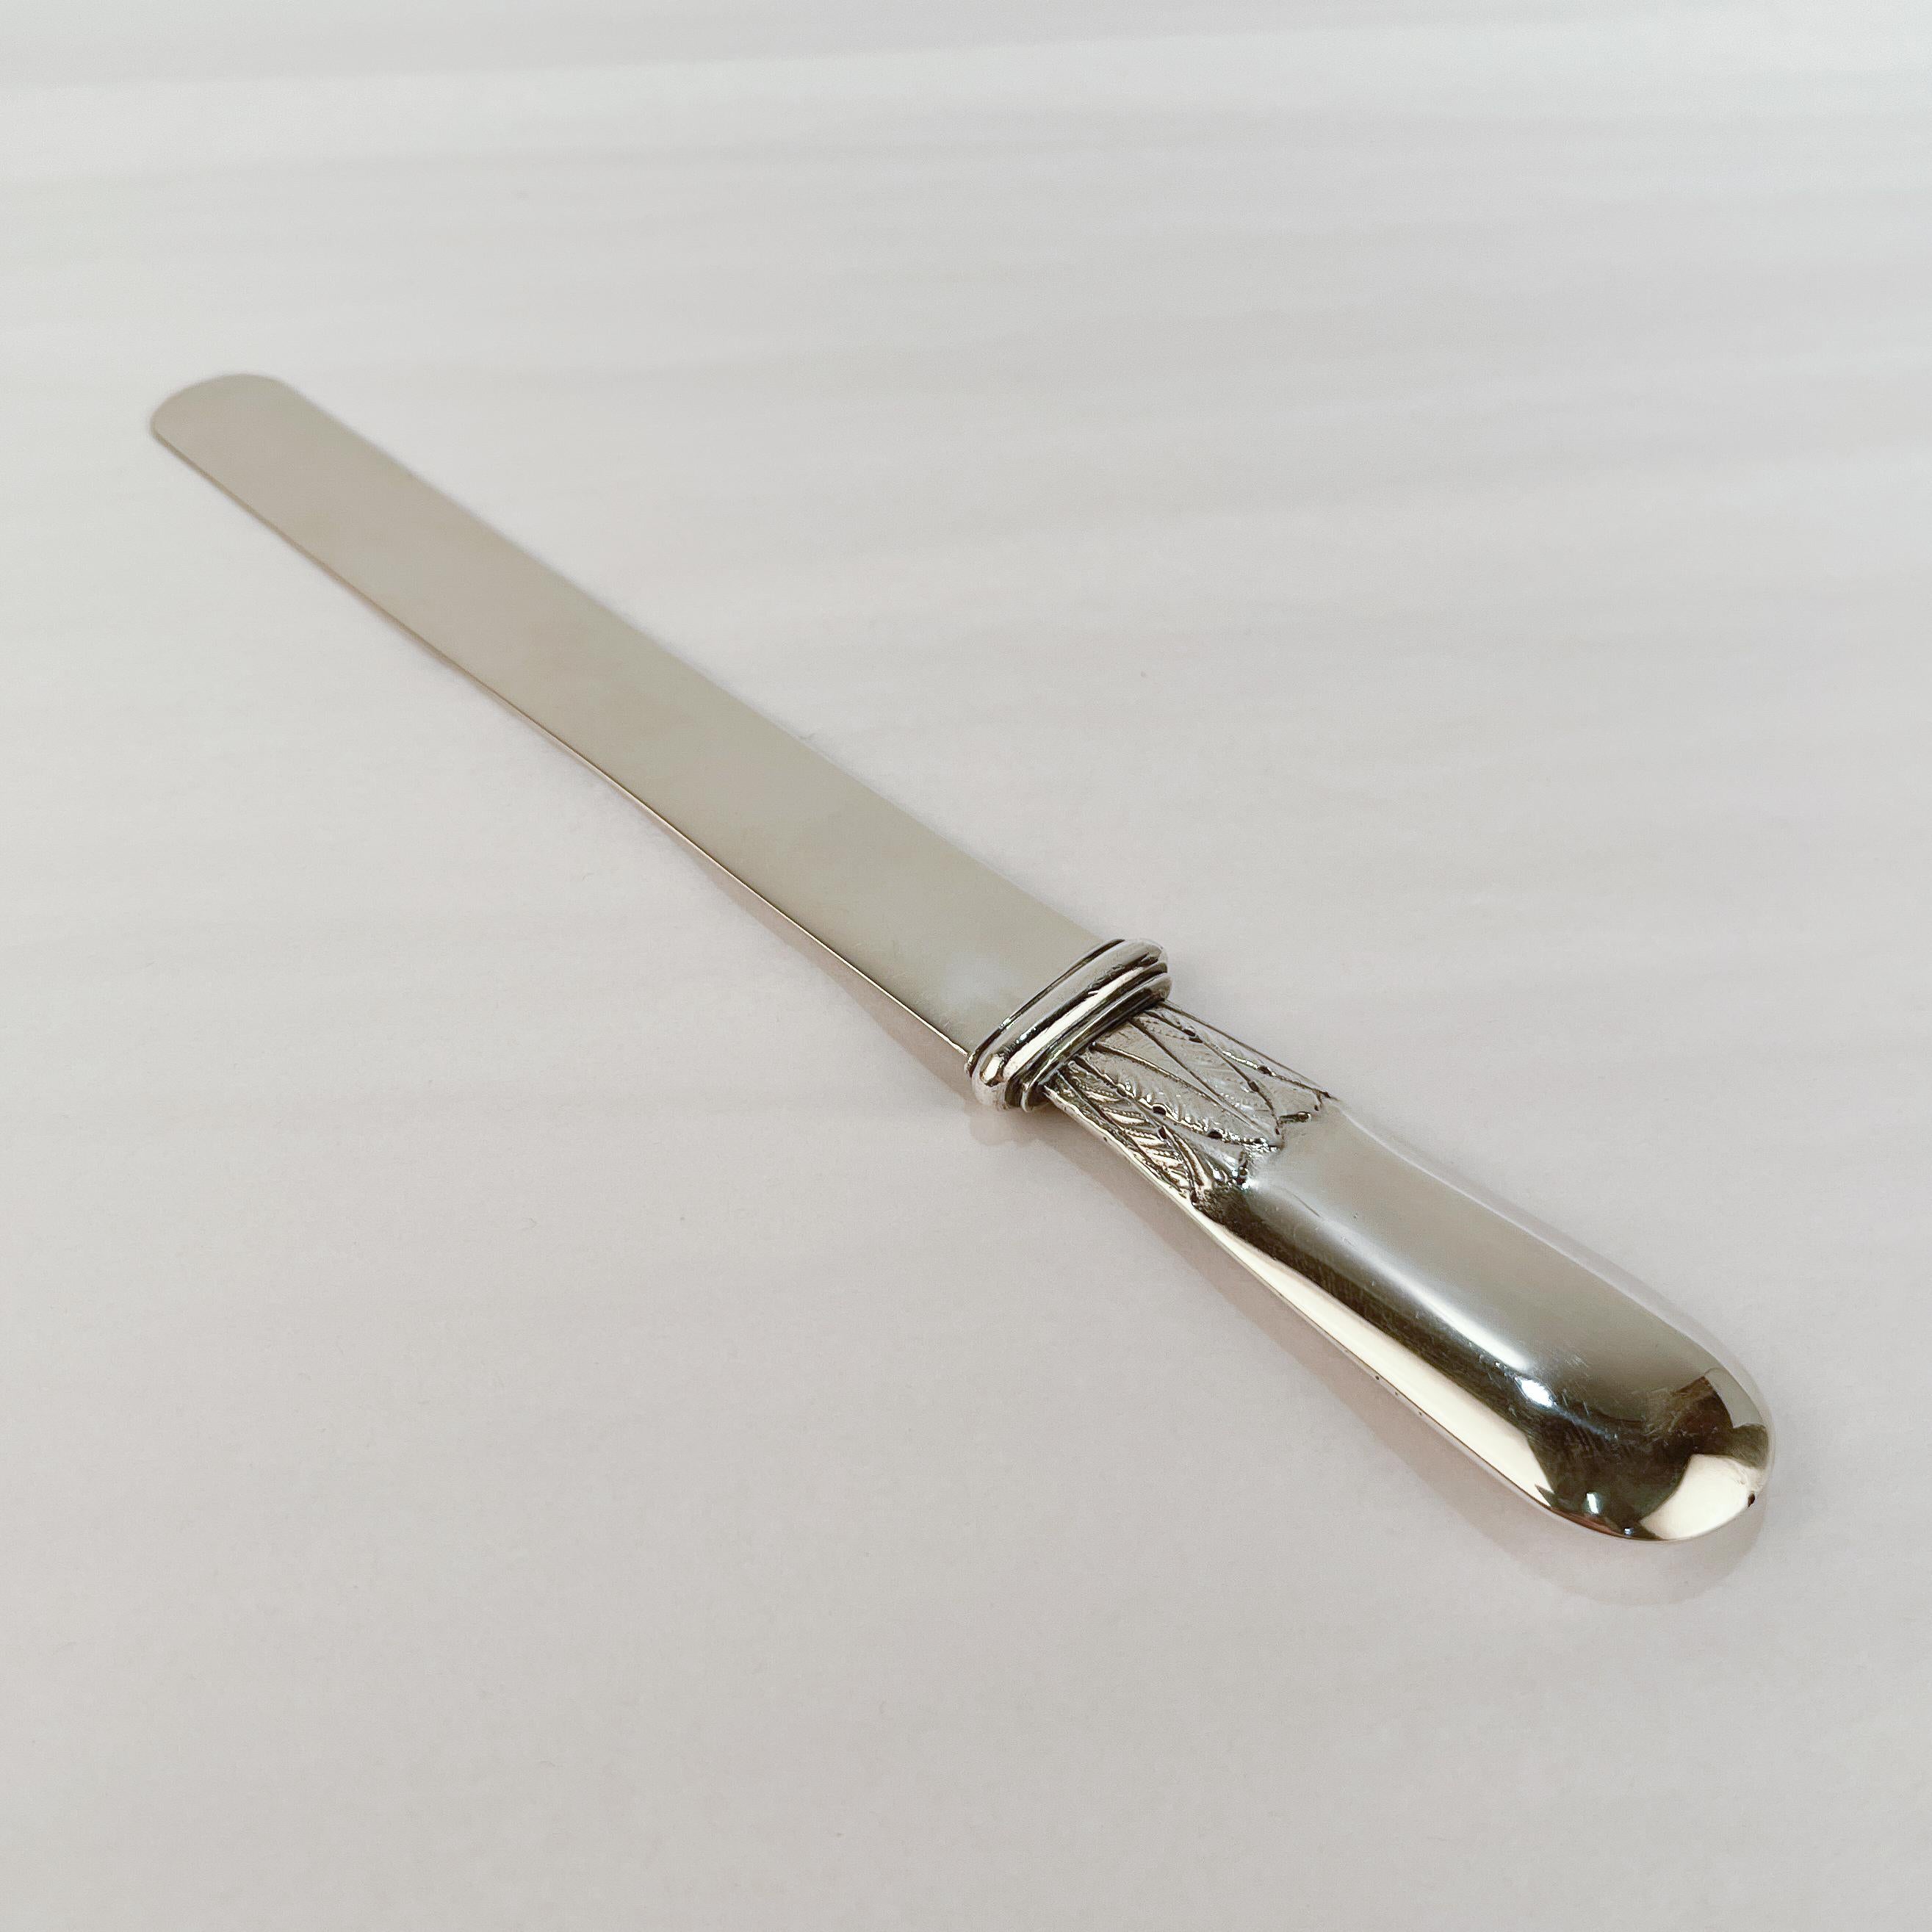 A fine Russian silver page cutter (or letter opener).

Possibly by Gerasim Mitrofanov.

With a lozenge form handle with cast leaf-work. 

Marked with a second Kokoshnik mark (1908 to 1926) for Moscow.

Simply a wonderful piece of antique Russian